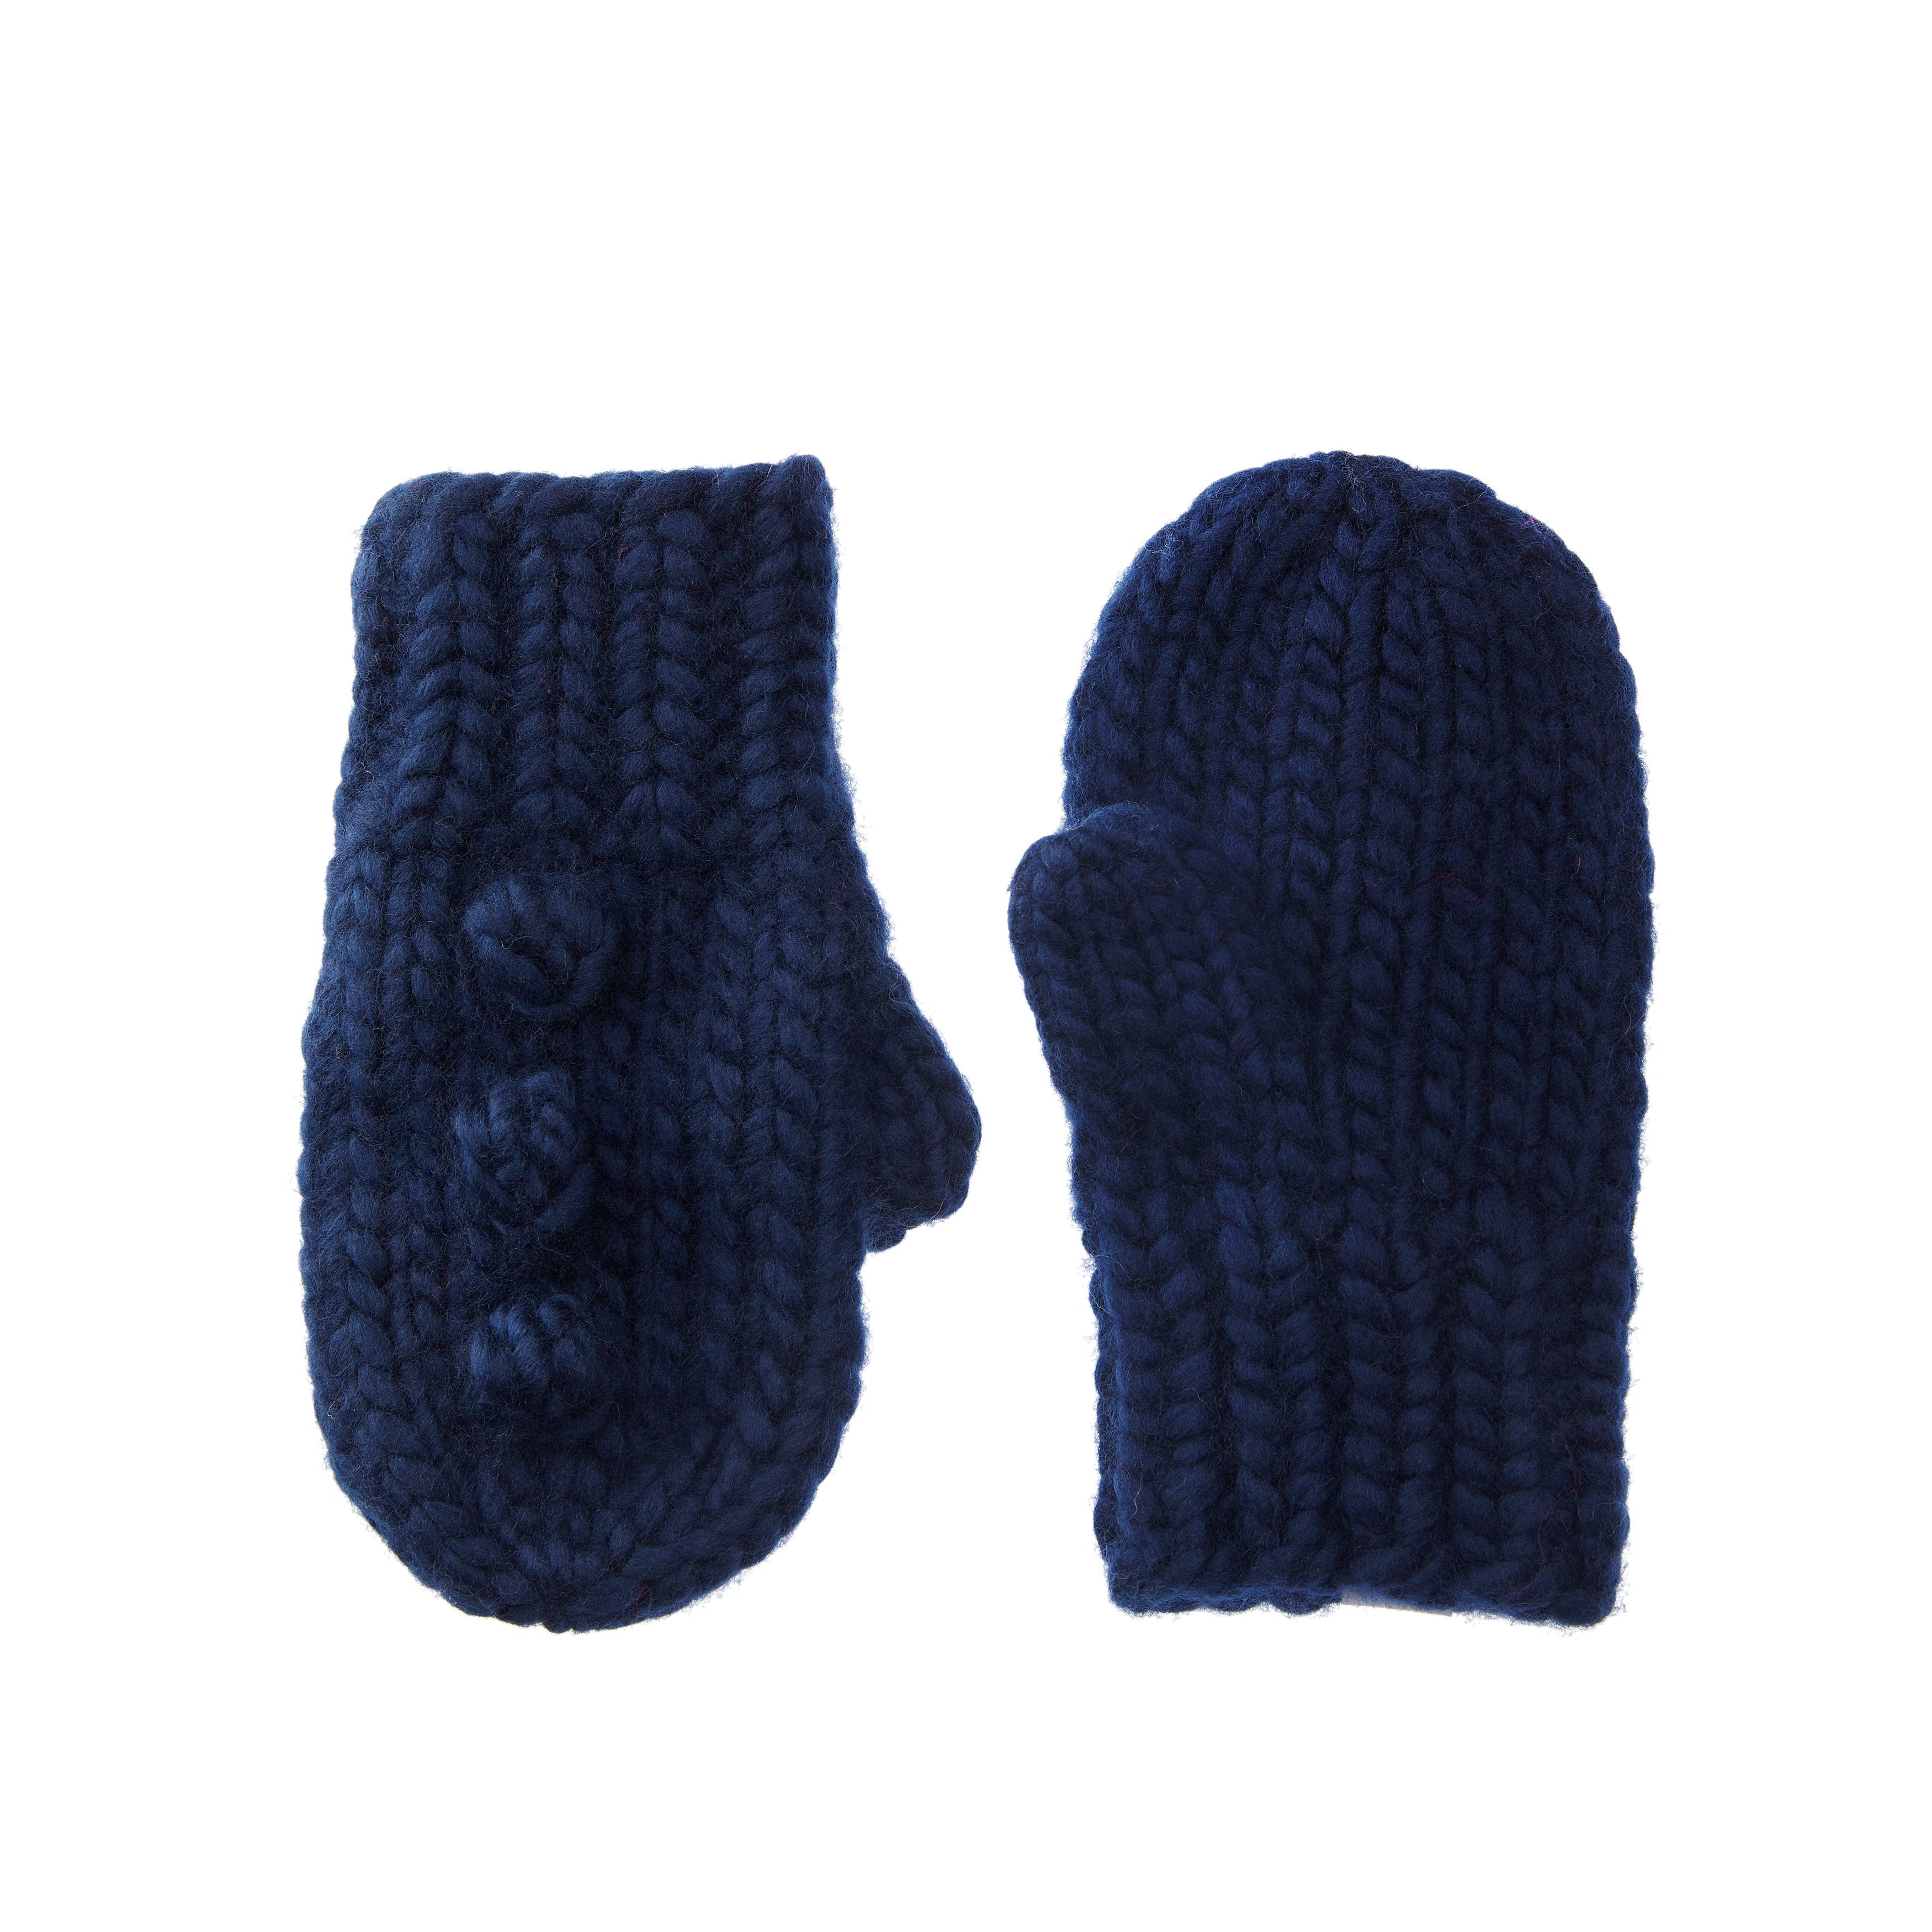 The Toddler Lil Campbell Mittens